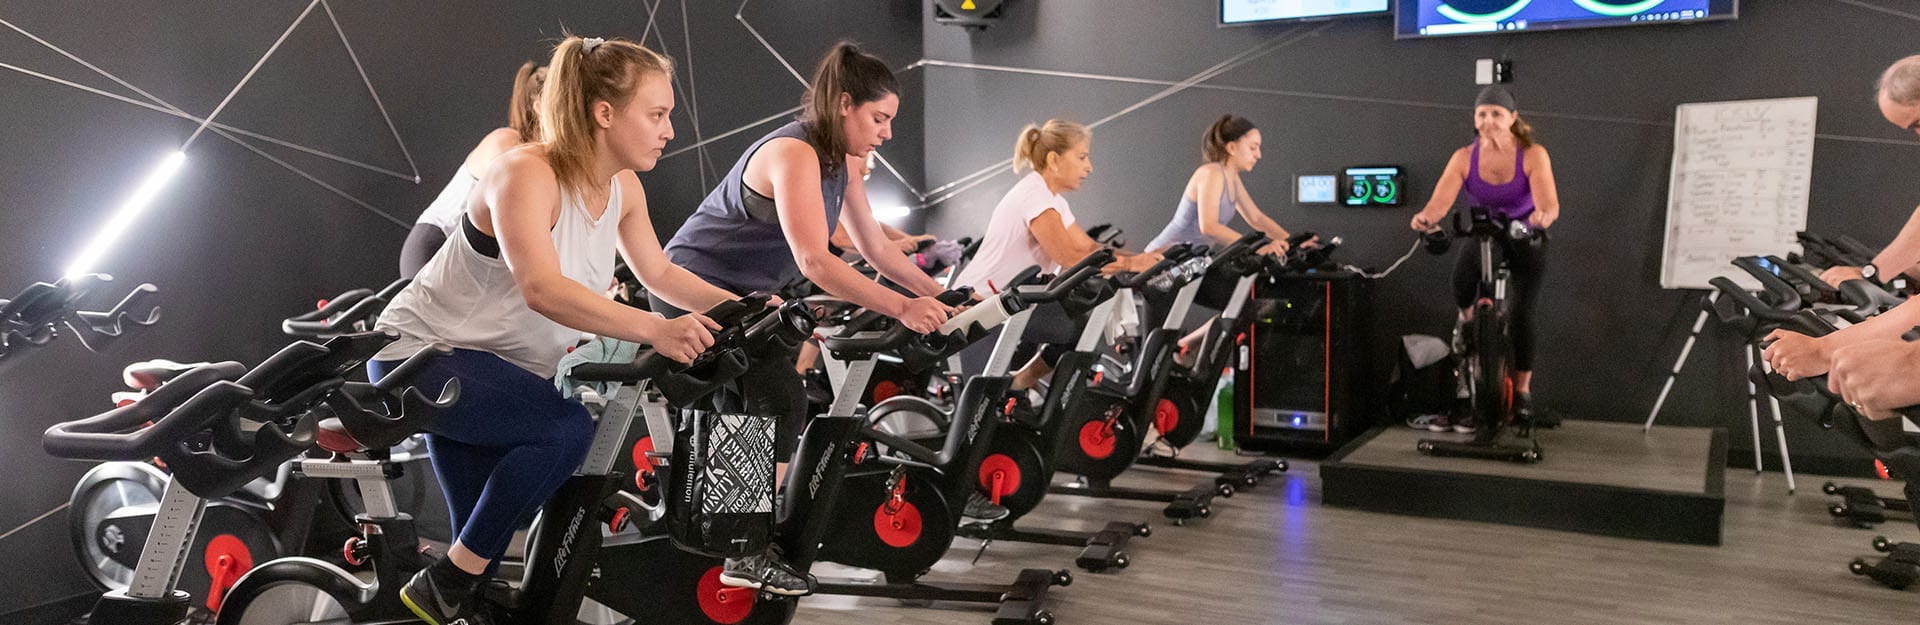 cycling class in session at modern gym